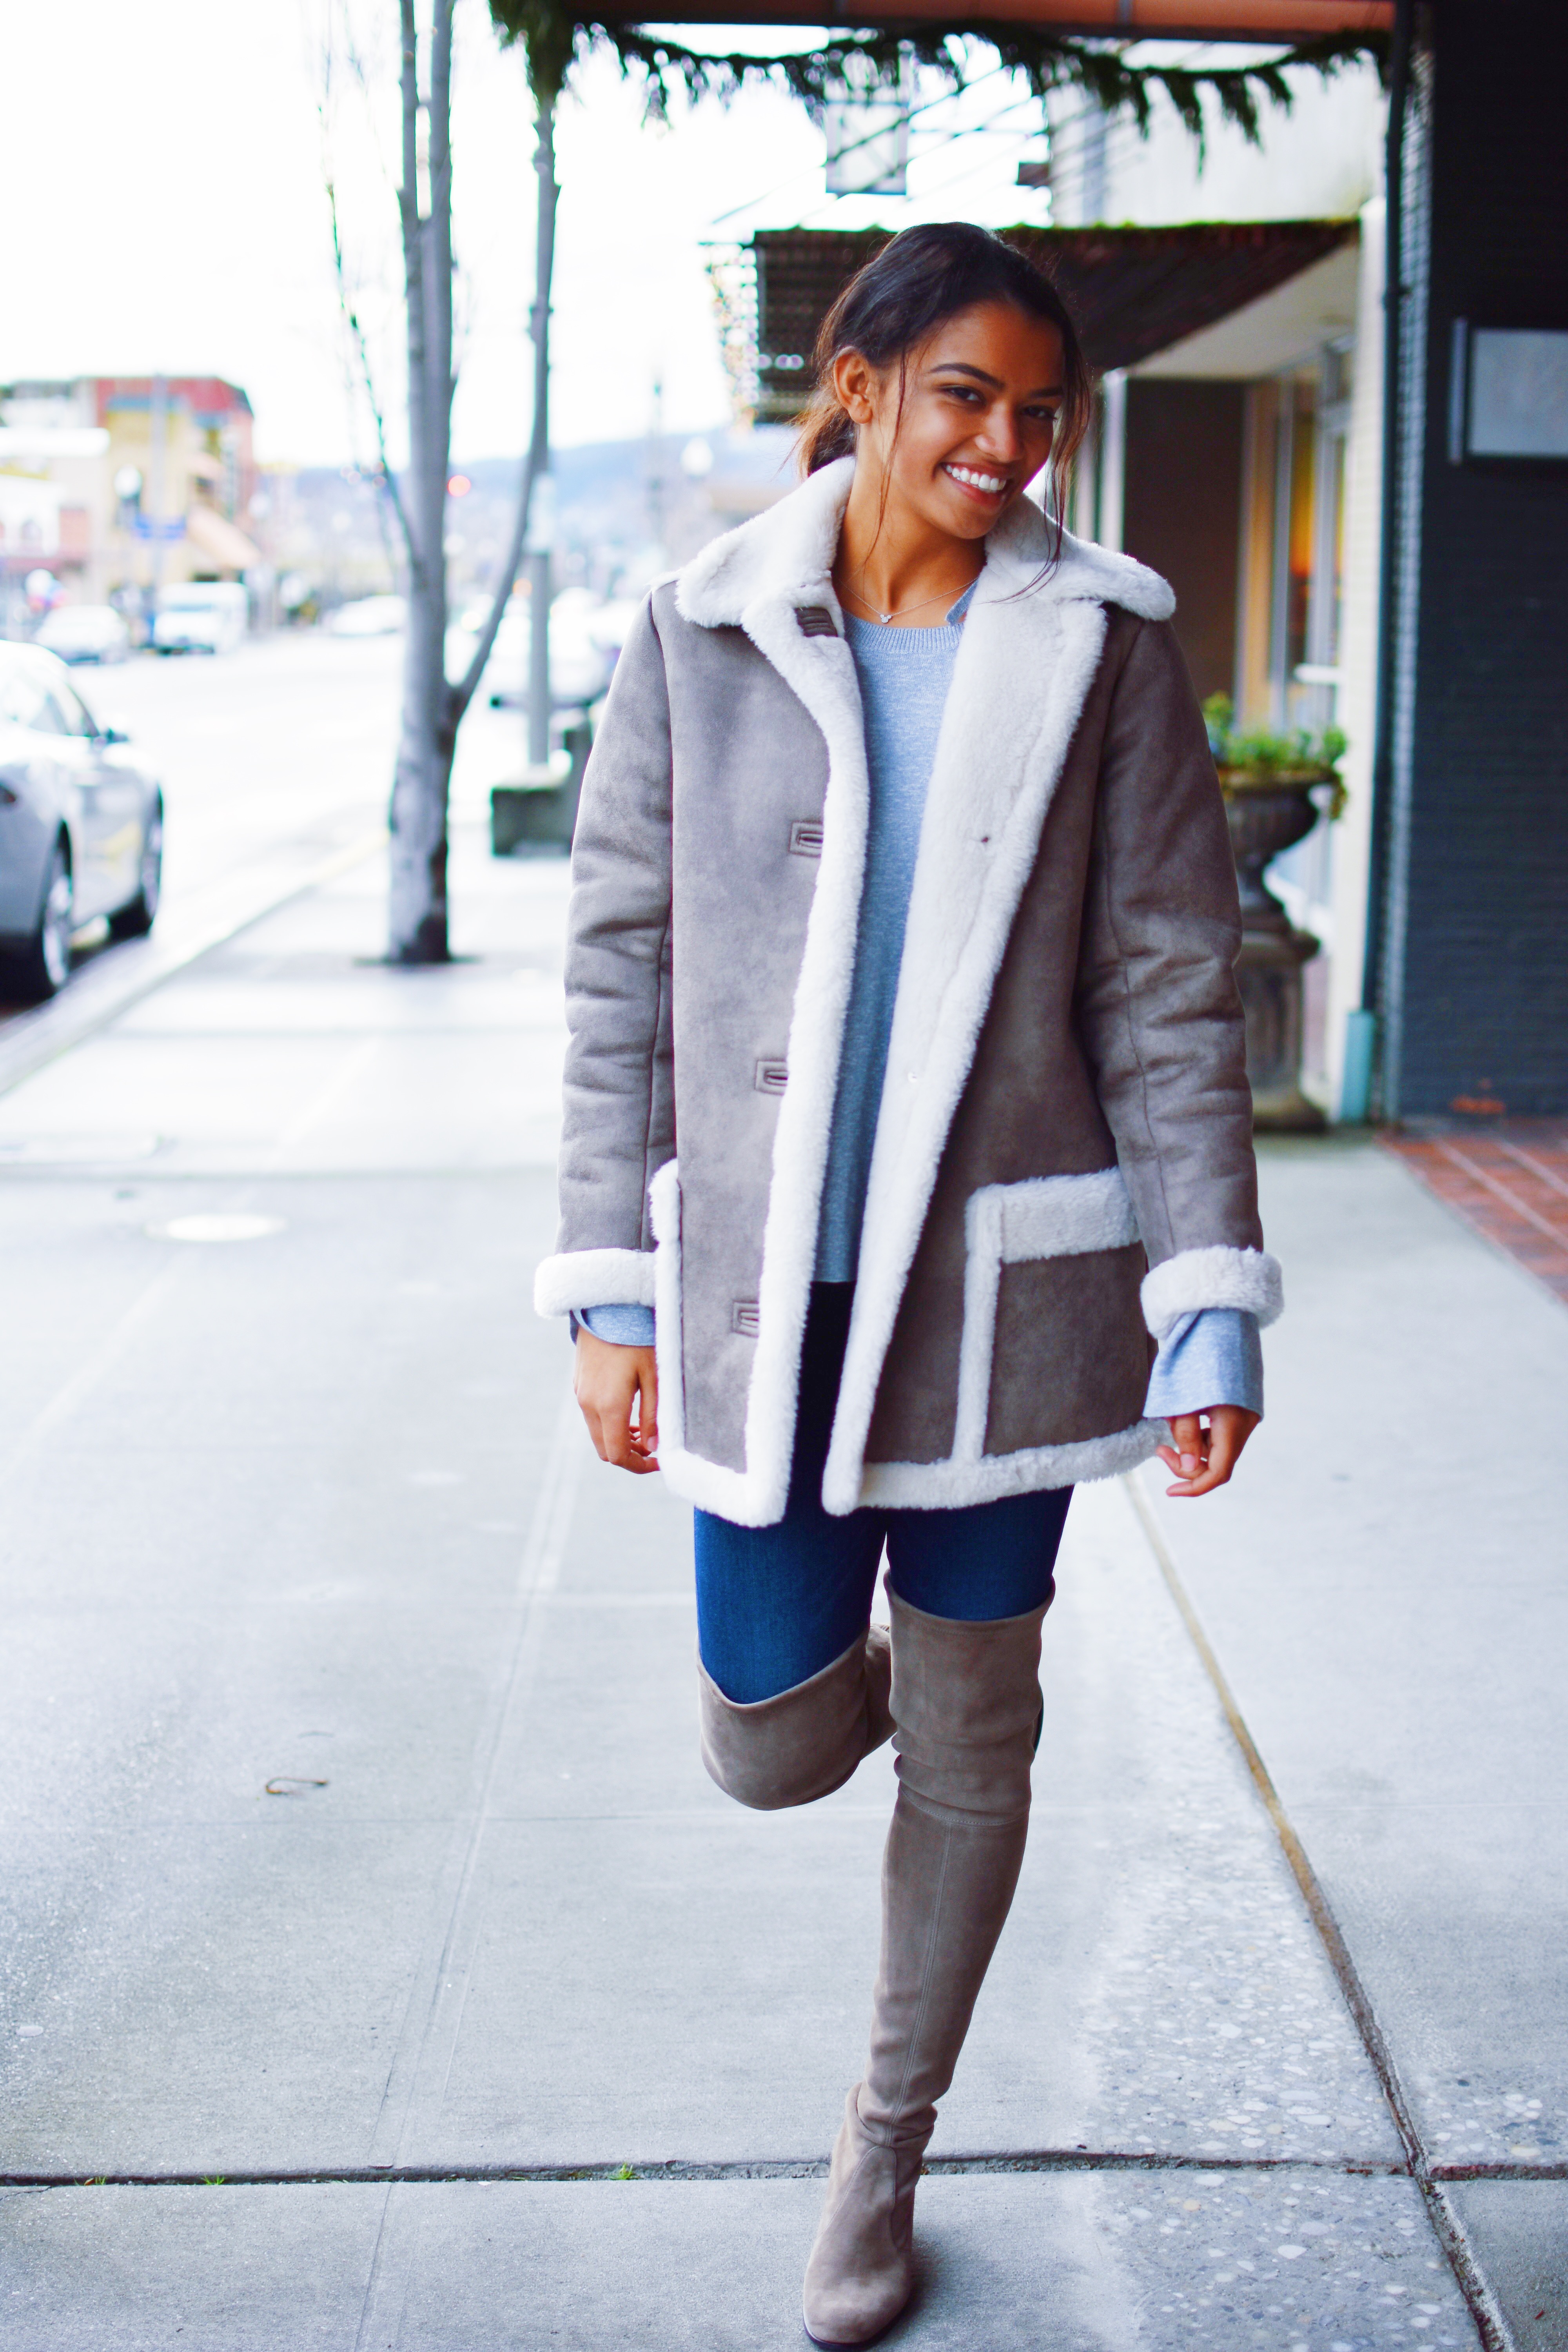 Shearling Coat For Less